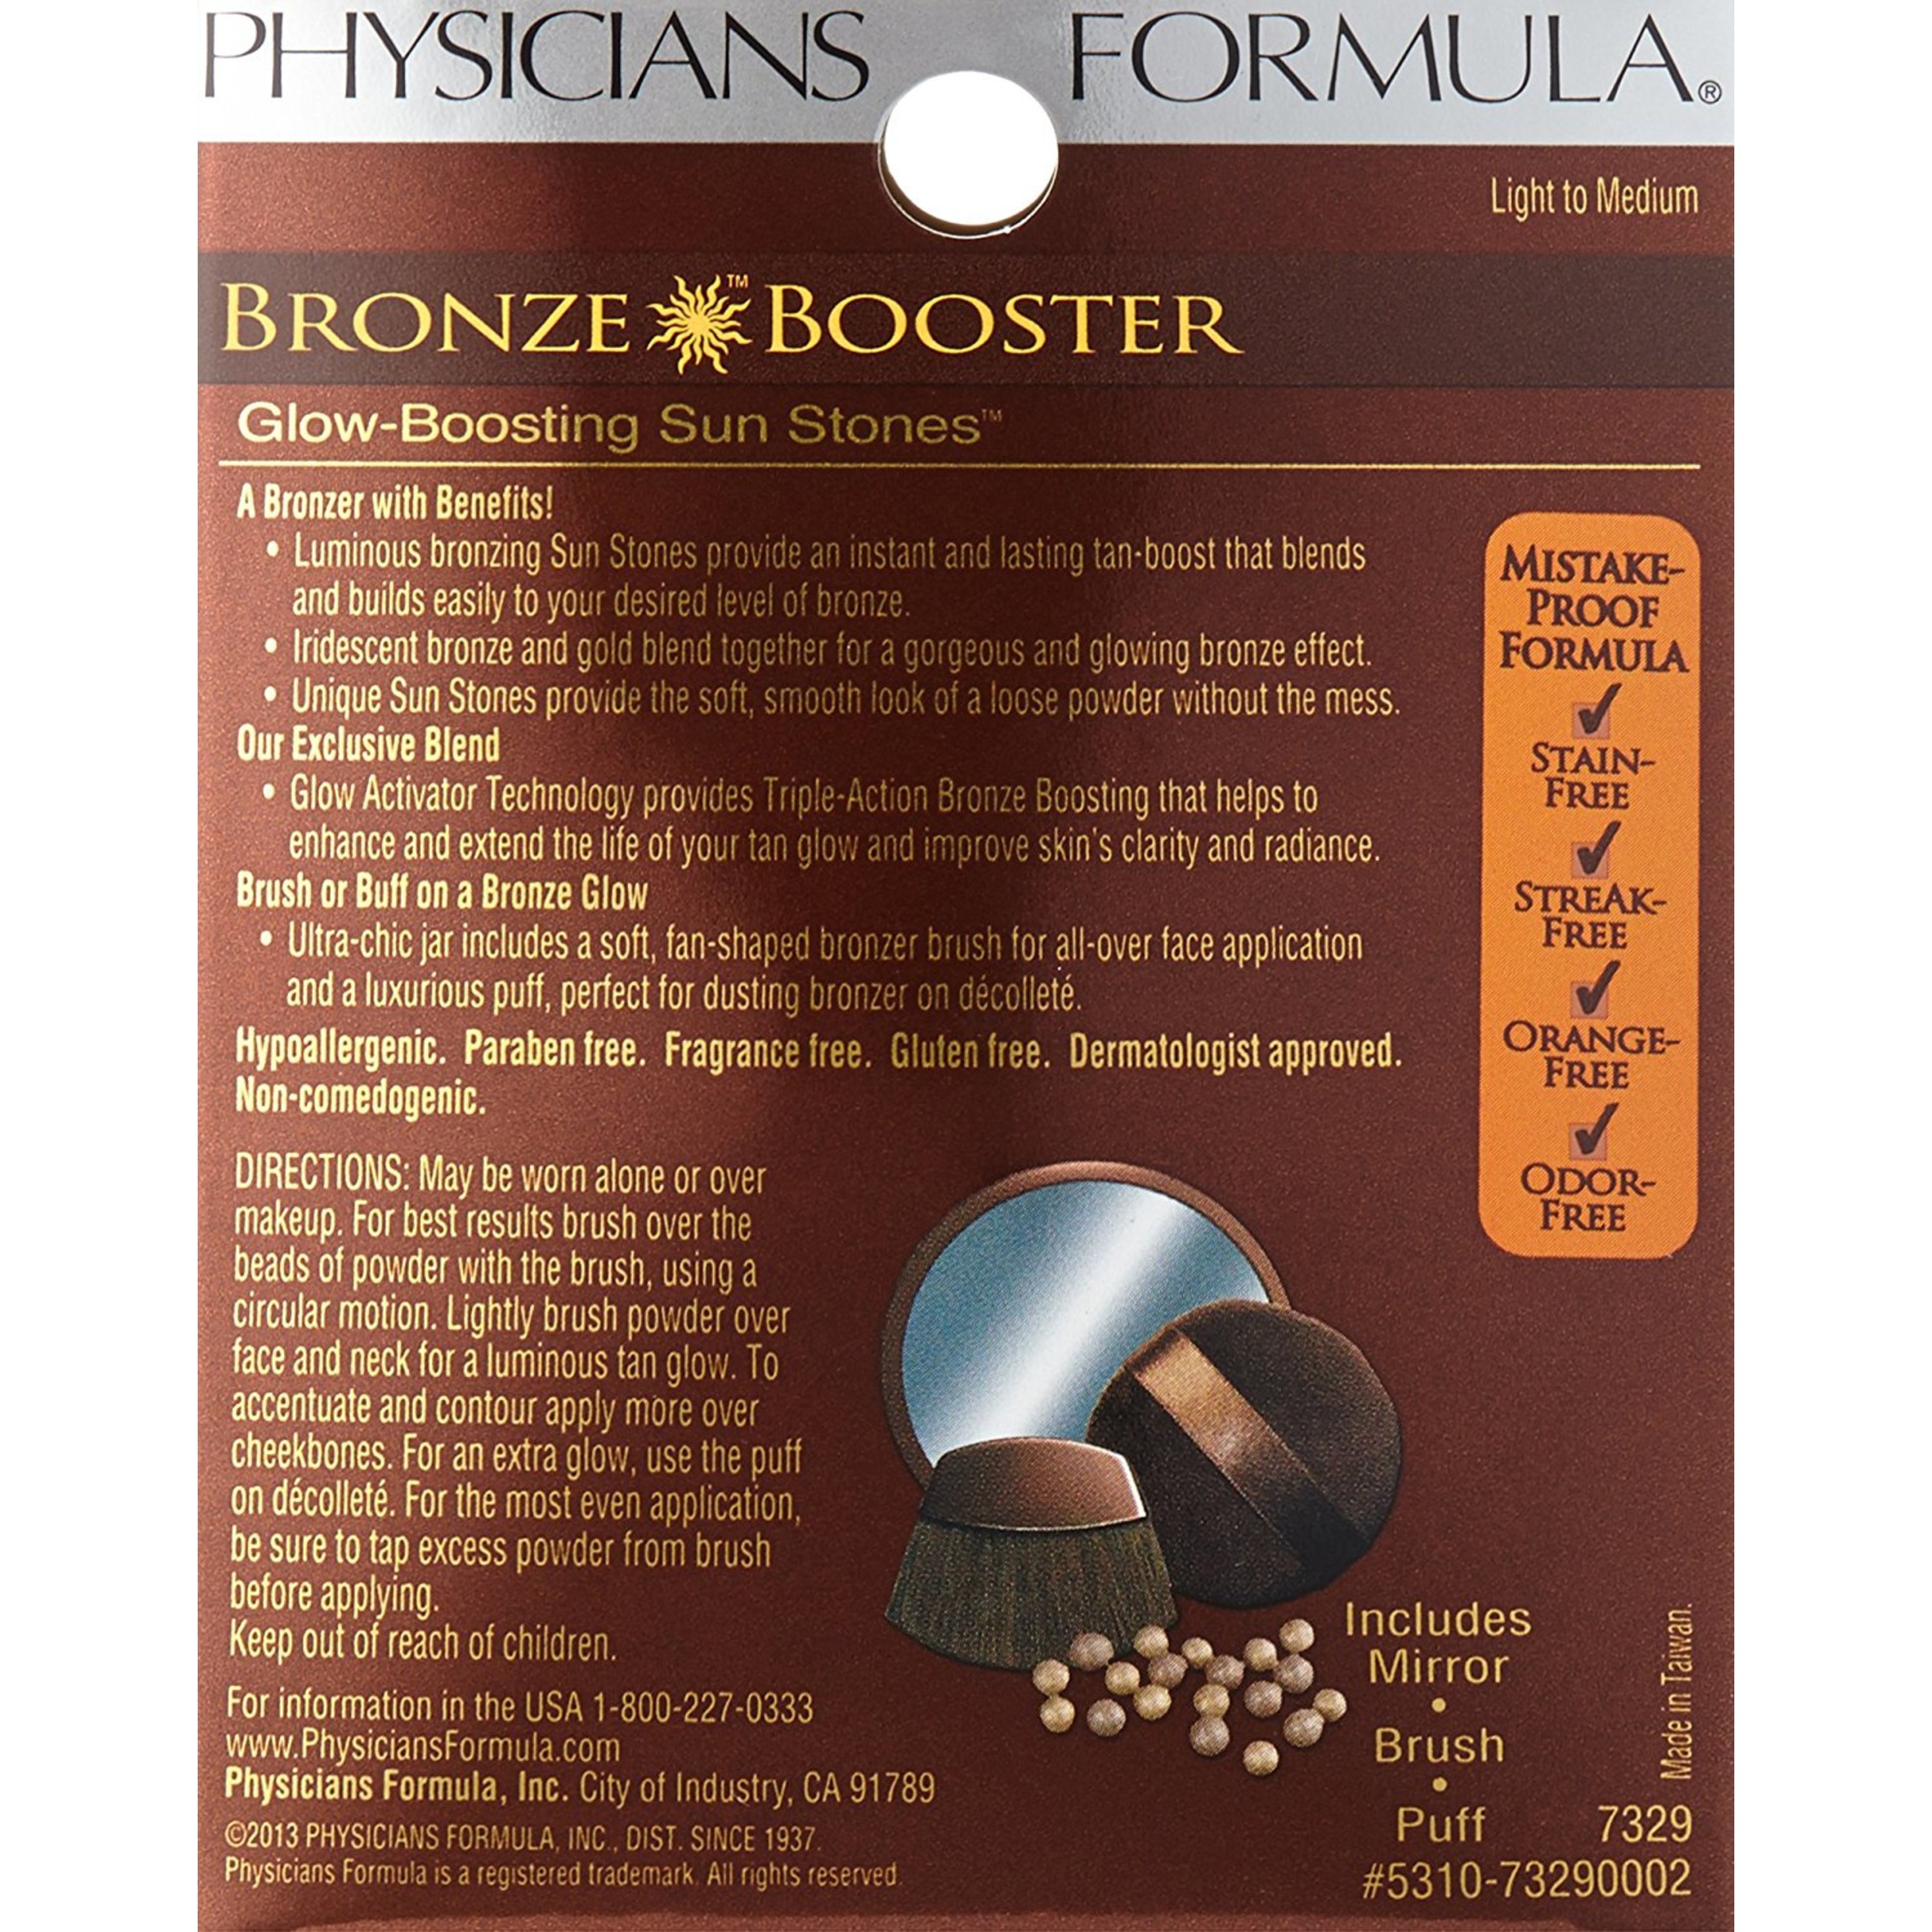 Physicians Formula Bronze Booster Glow-Boosting Sun Stones, Light to Medium - image 4 of 5